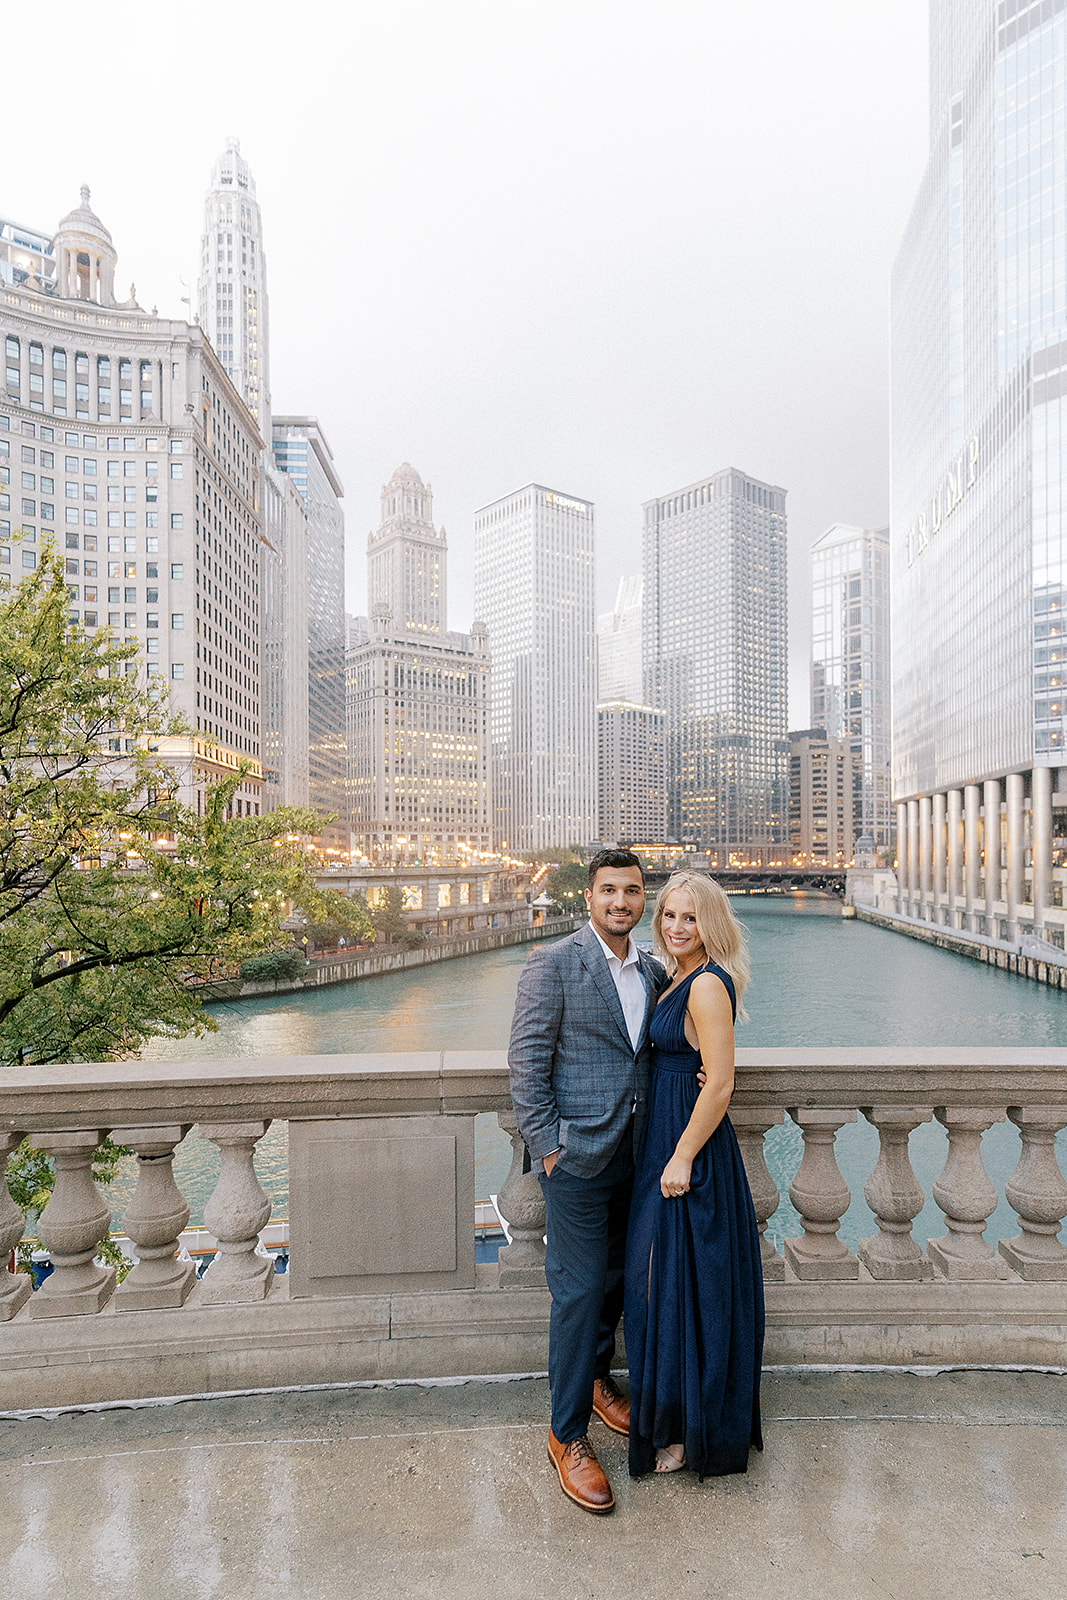 The Best Engagement Session Downtown Chicago | Chernogorov Photography Destination Wedding Photographers